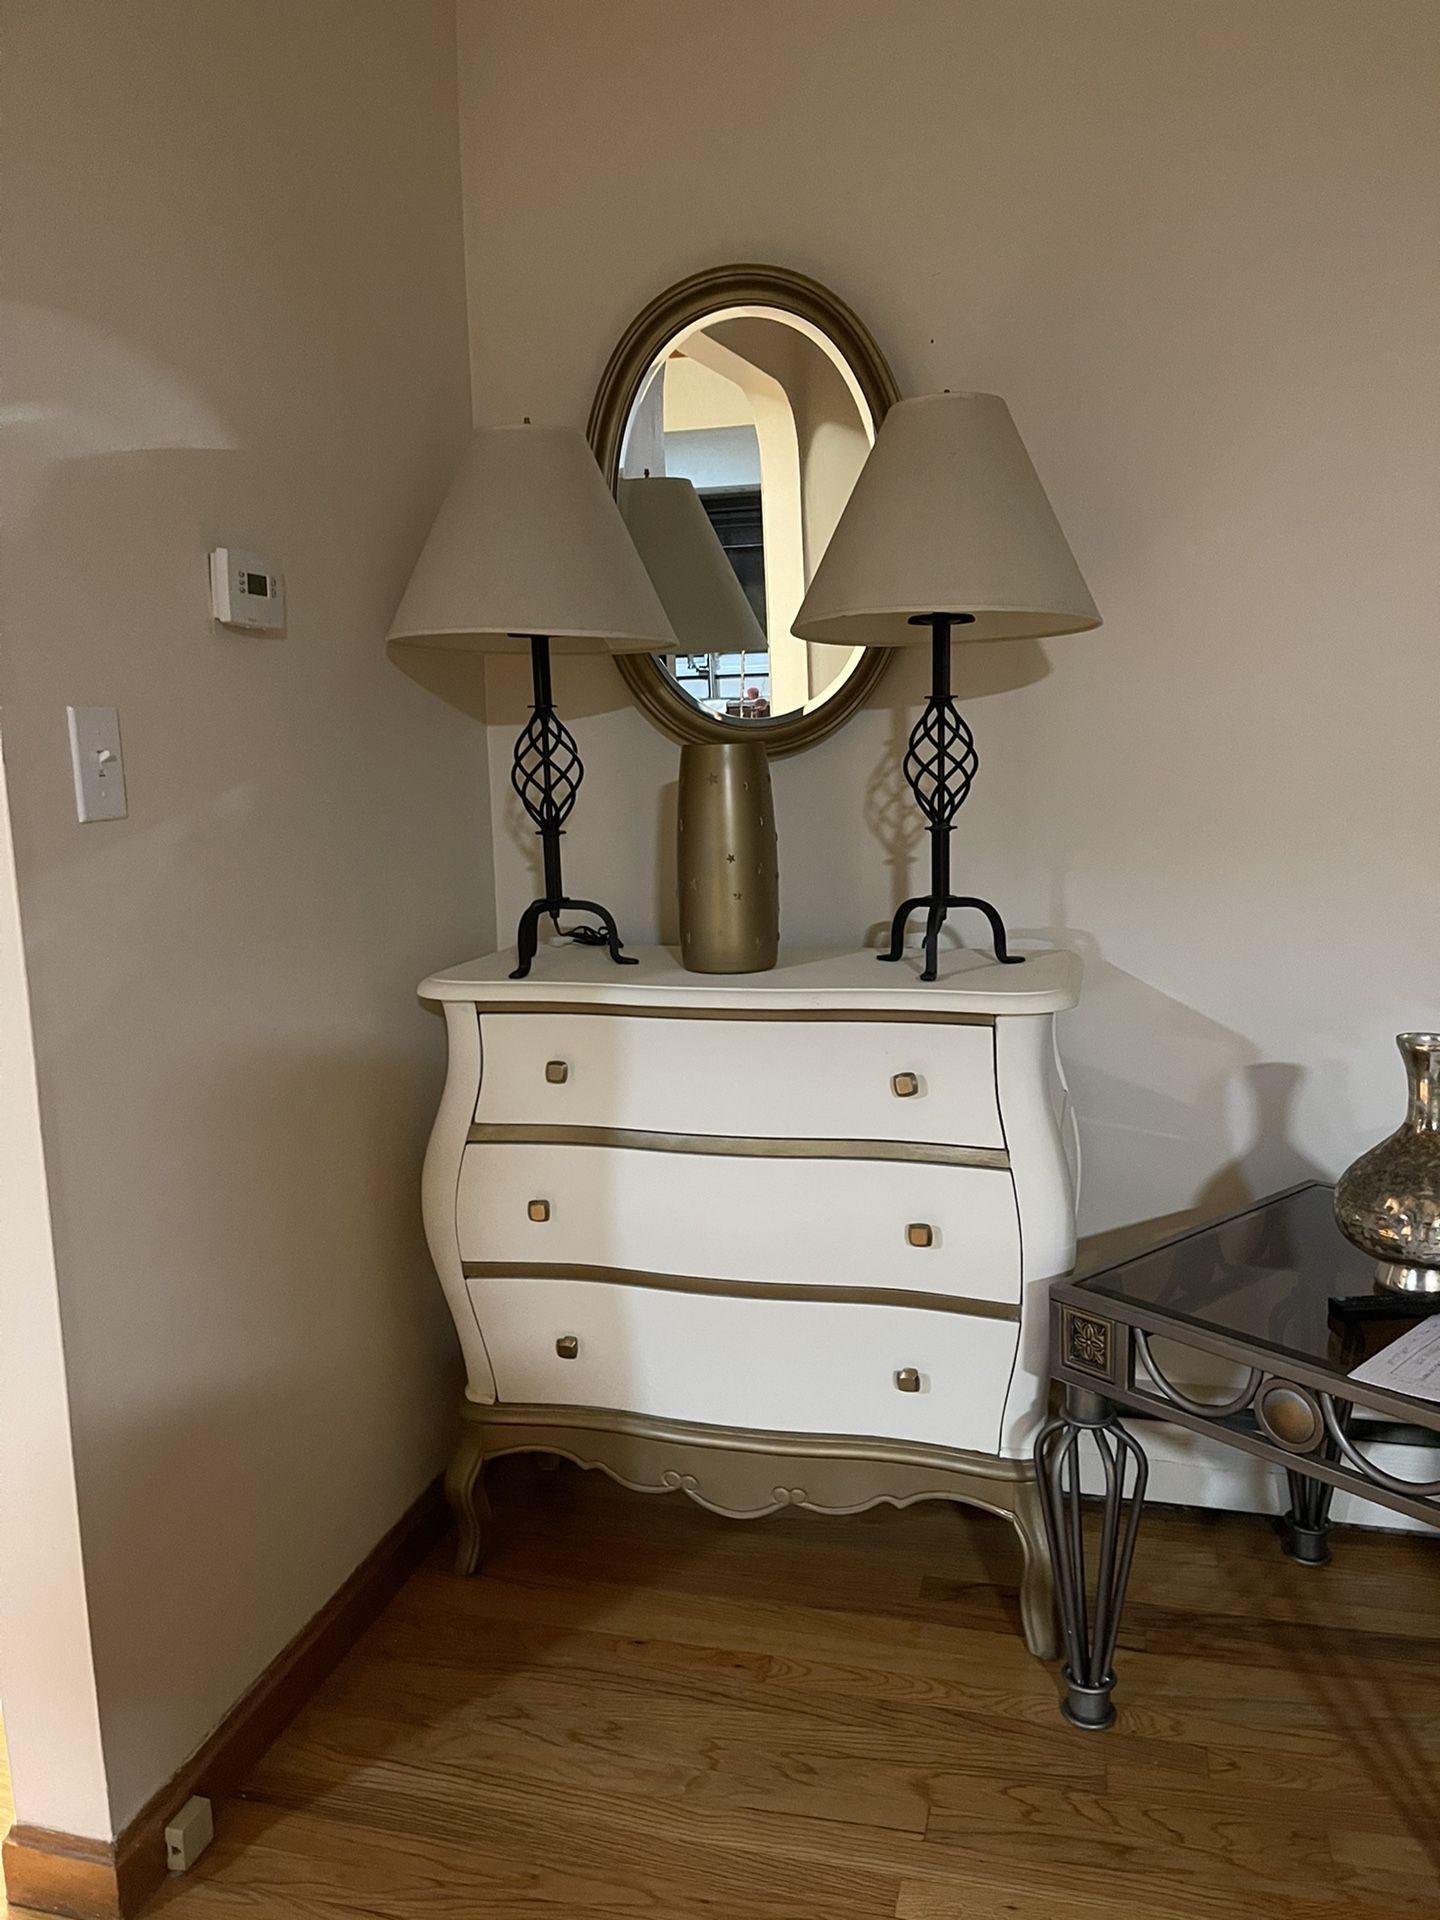 $200 Beautiful entrance furniture with decorations and lamps included